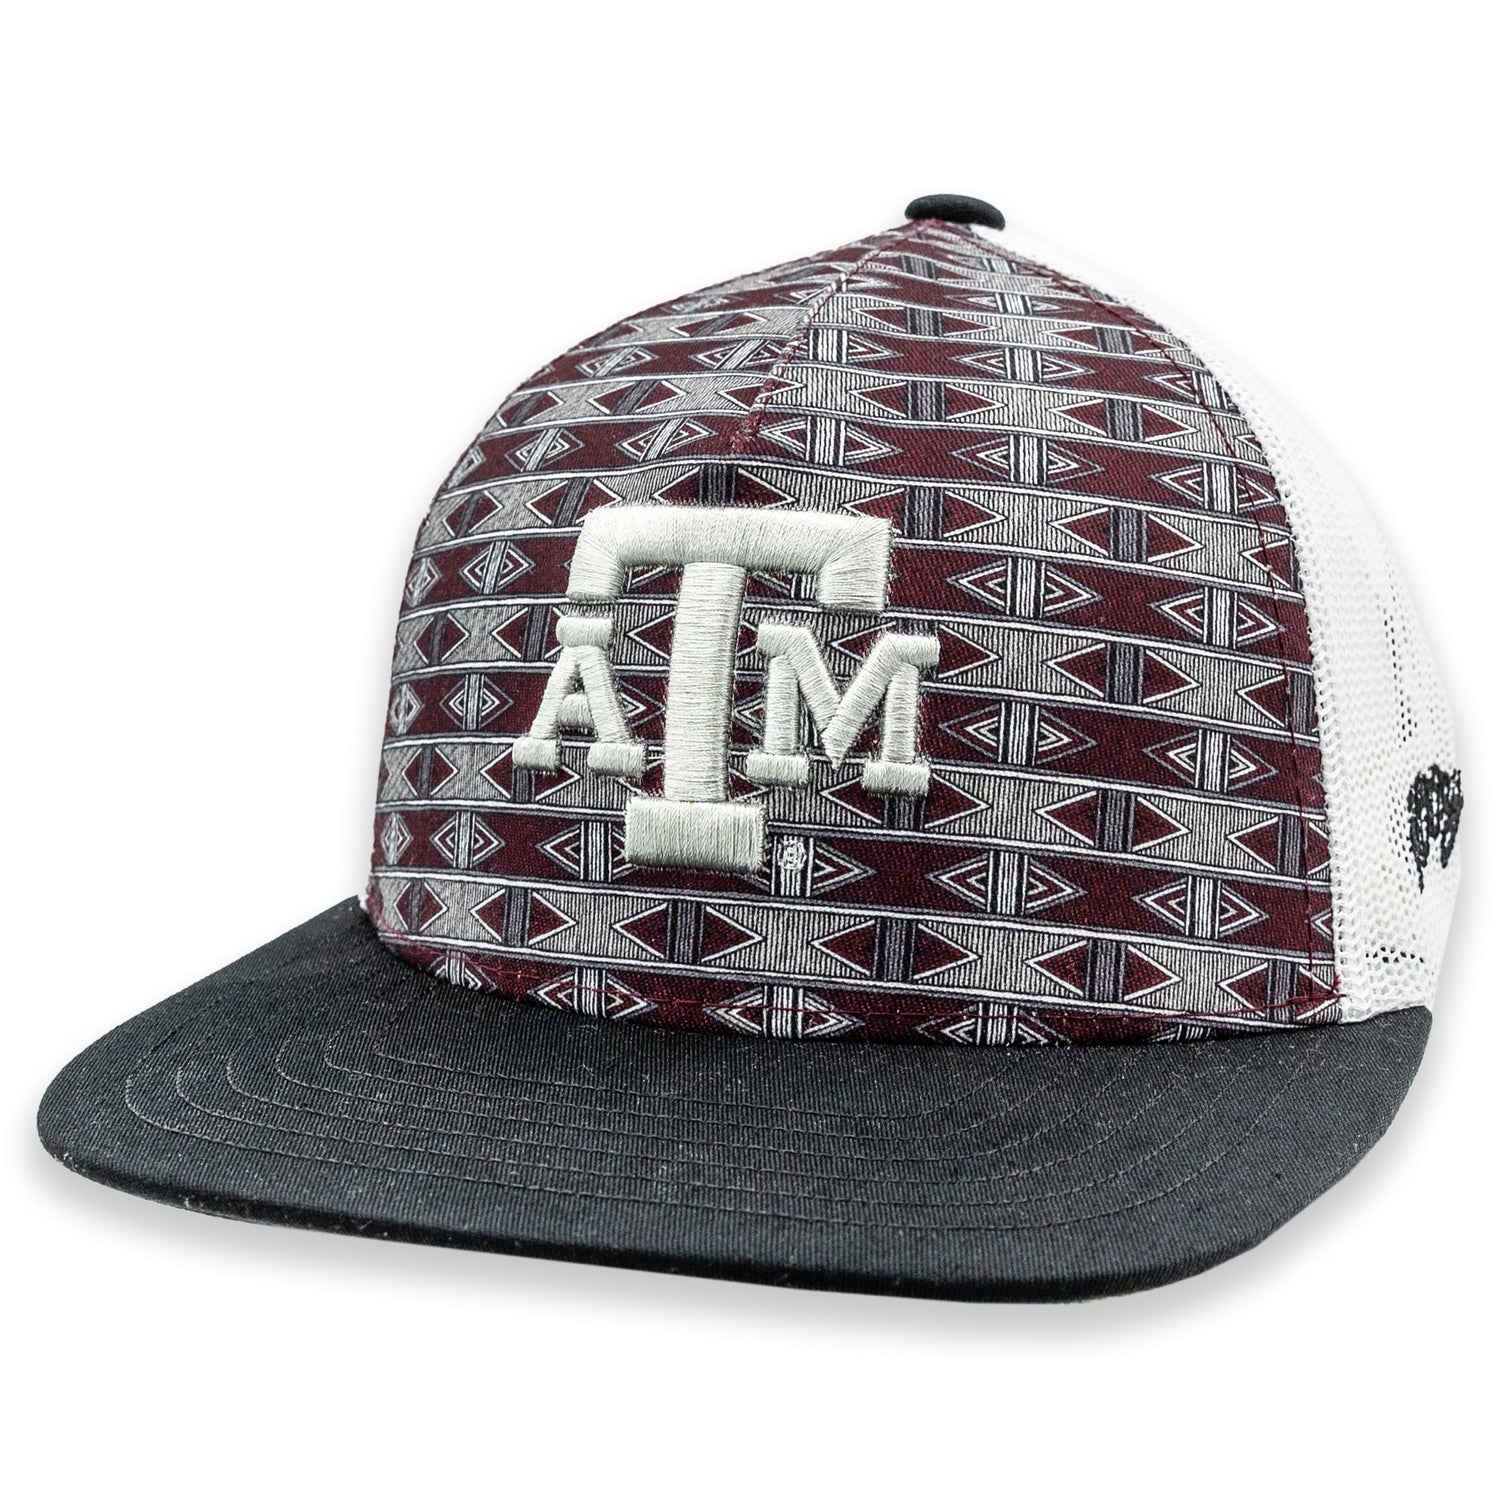 Texas A&M Hooey Aztec Pattern Chiseled Youth Cap